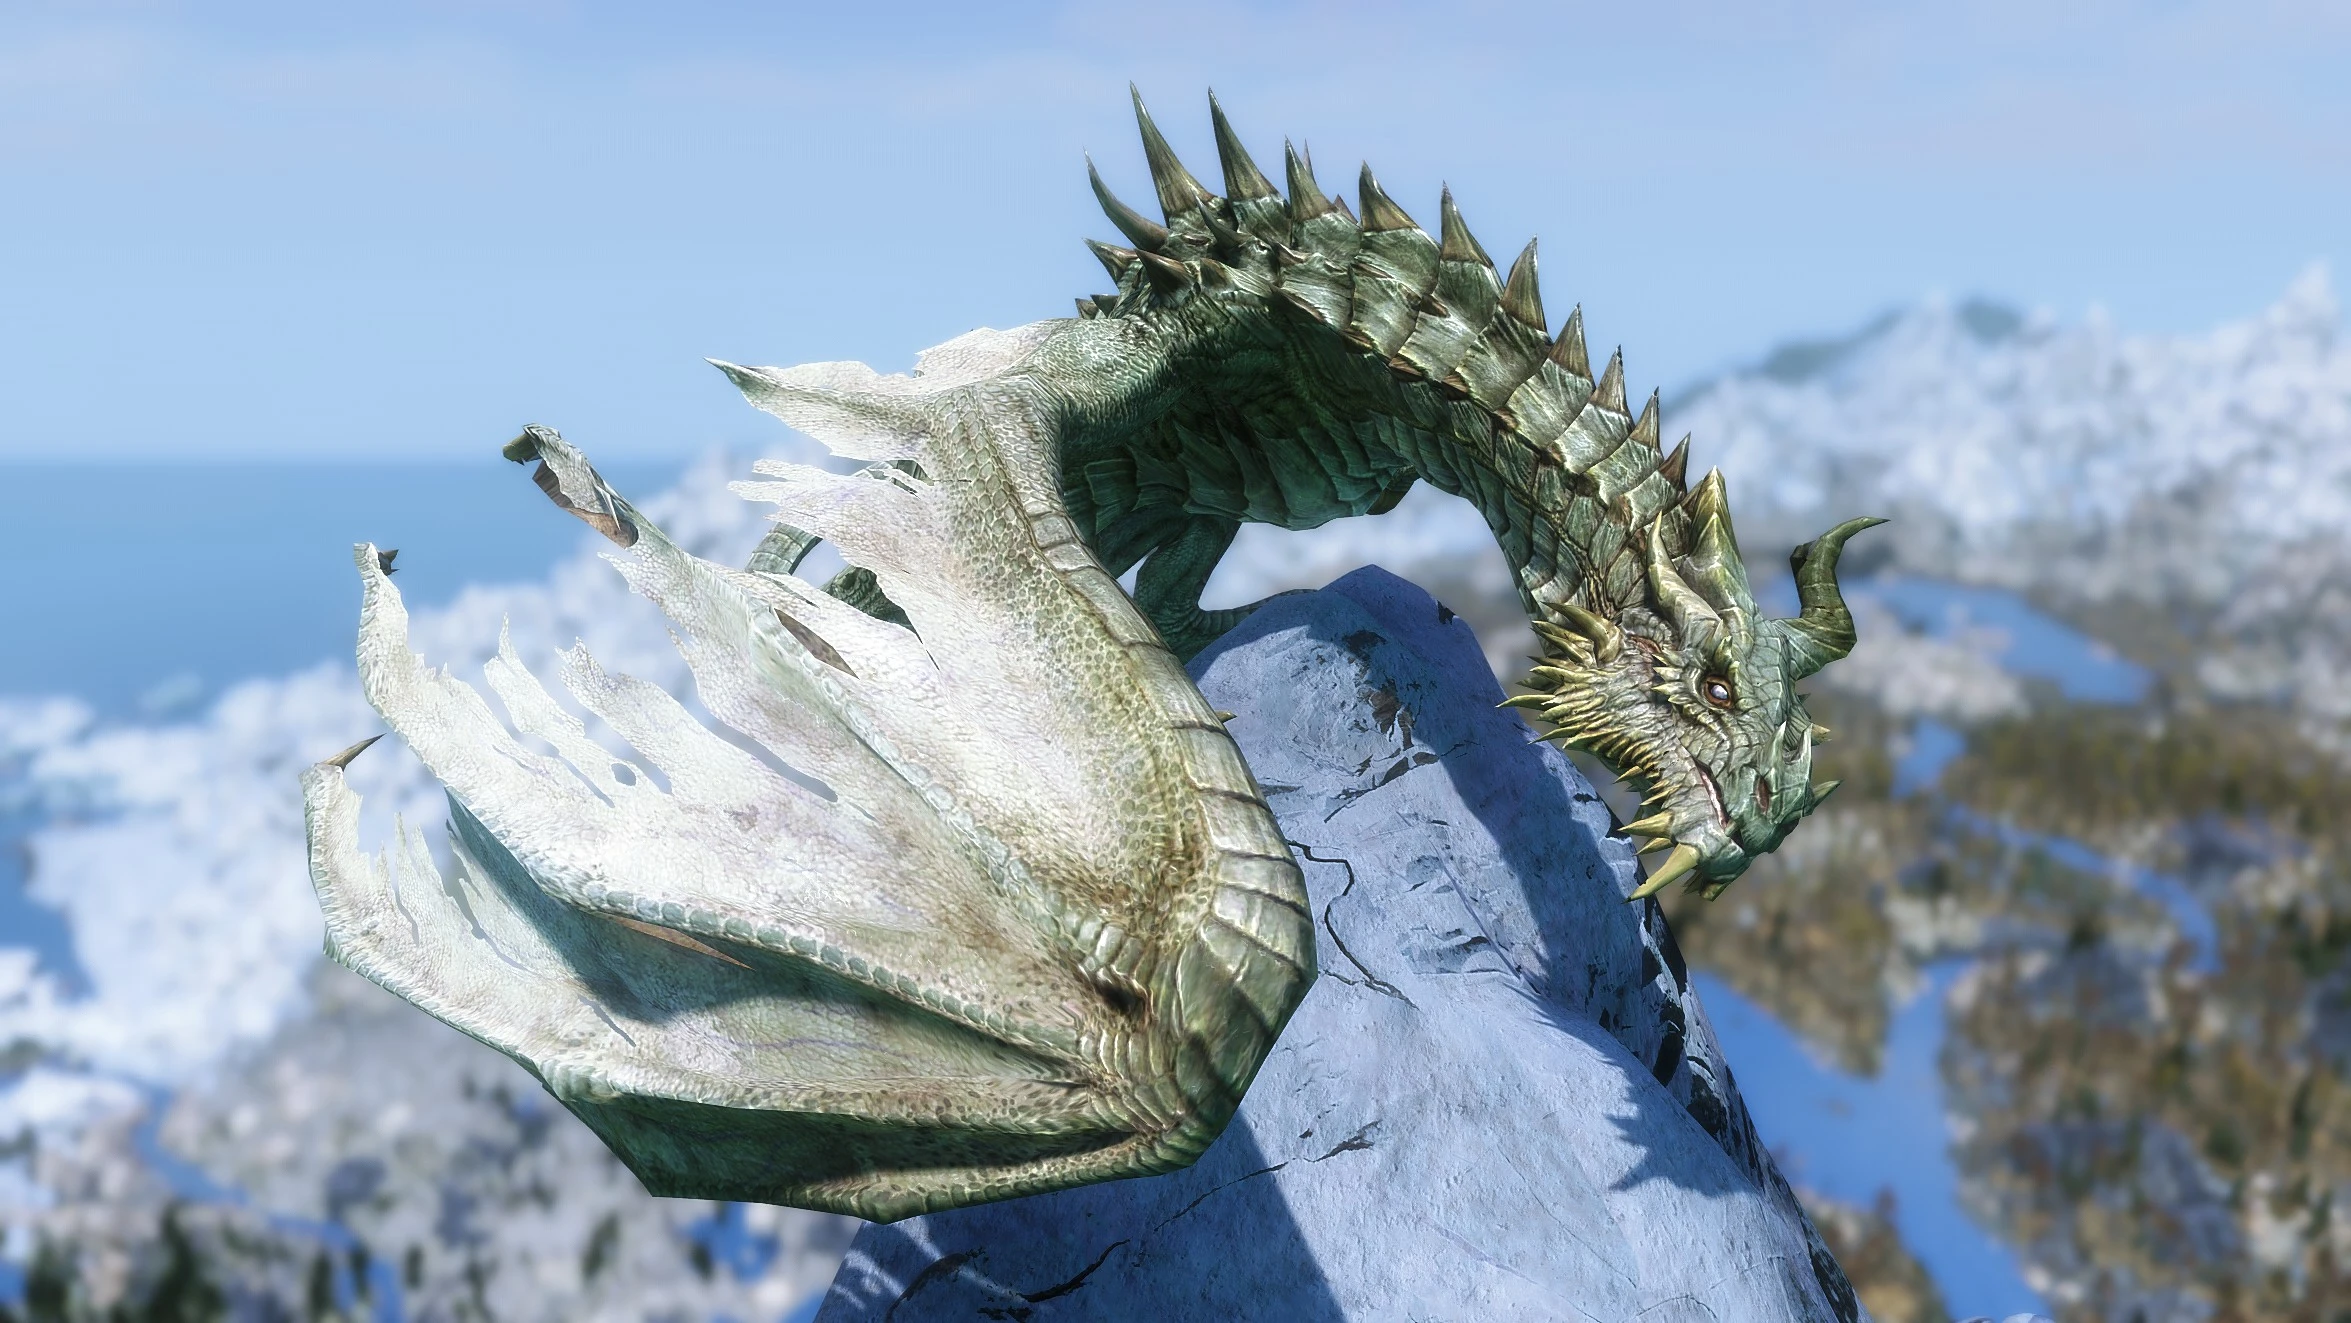 I think Paarthurnax is kinda cute for a dragon